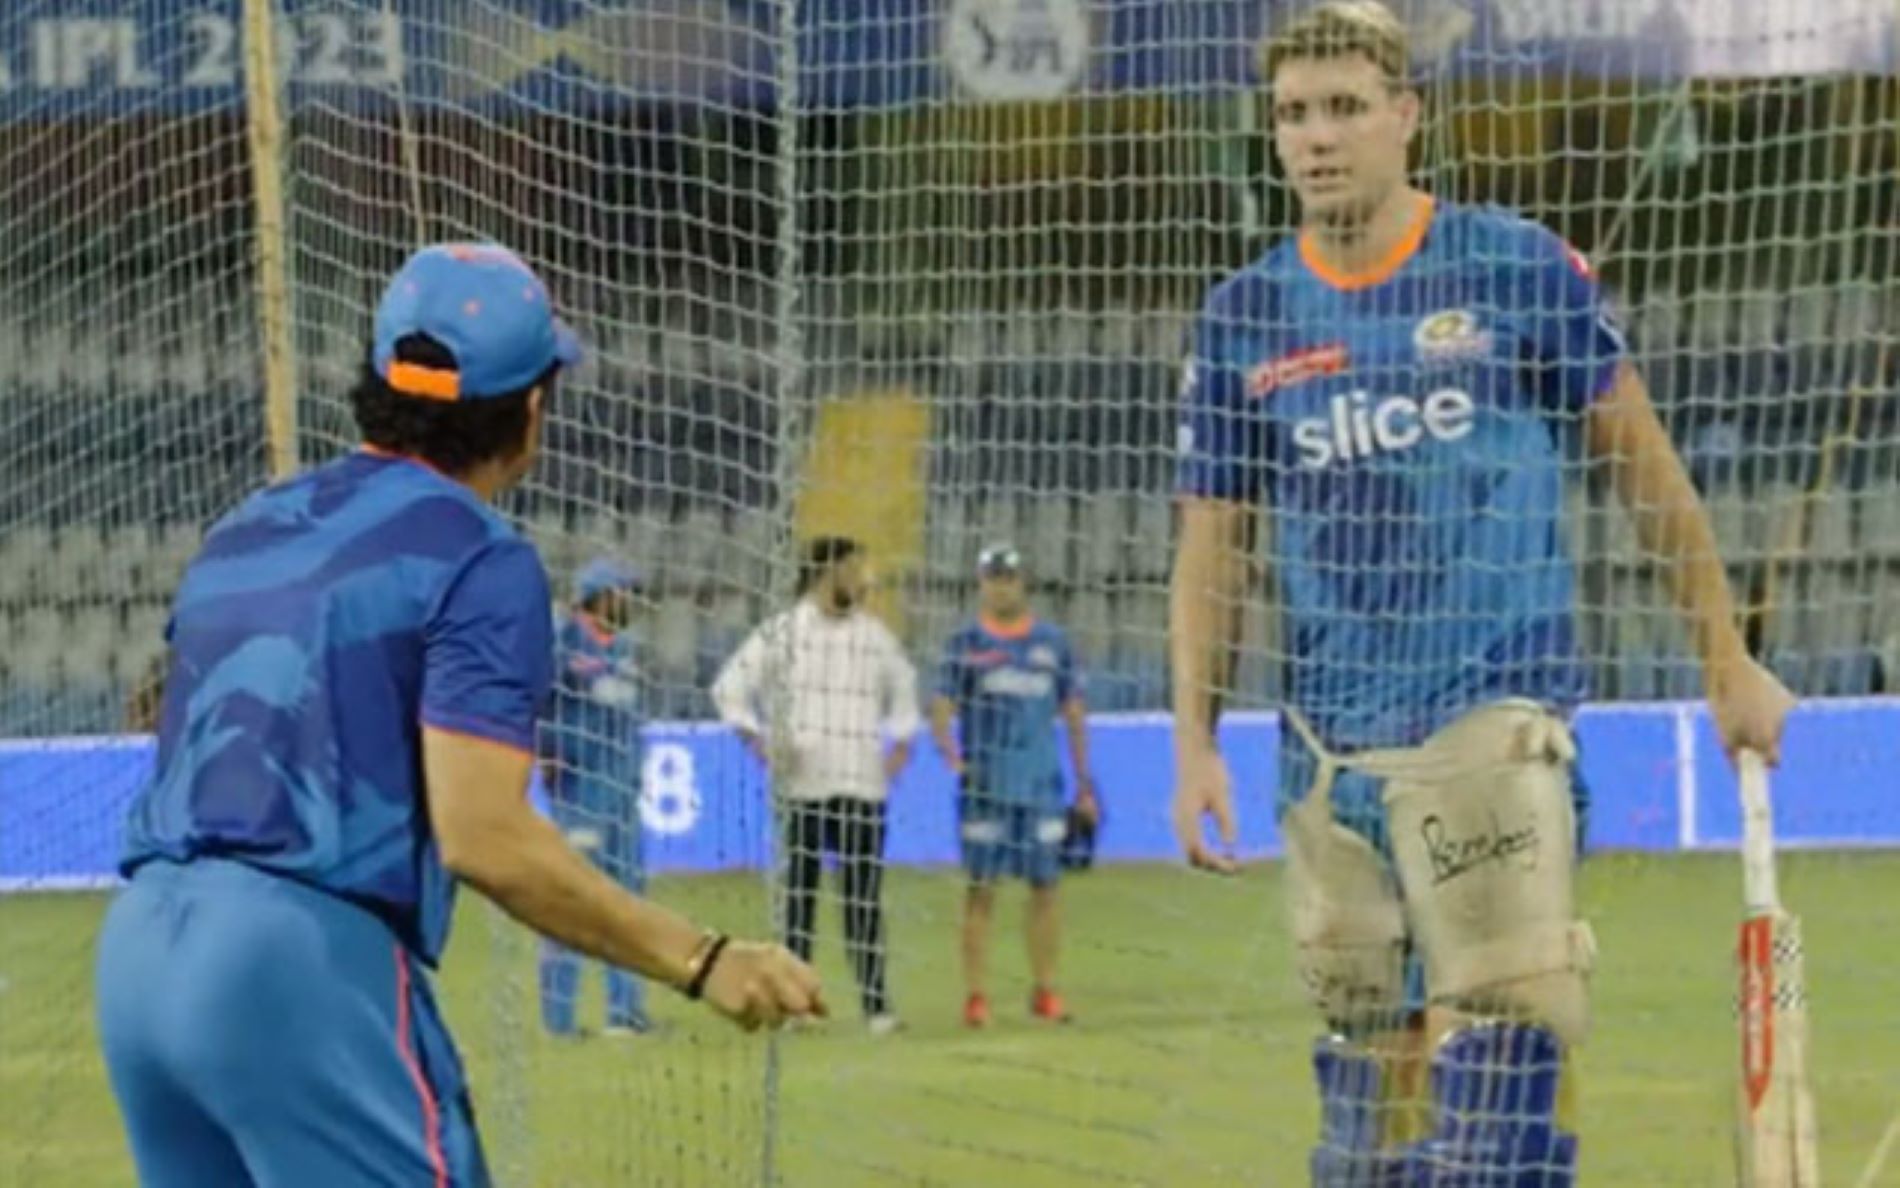 Cameron Green gets valuable inputs from Sachin Tendulkar ahead of the DC game.